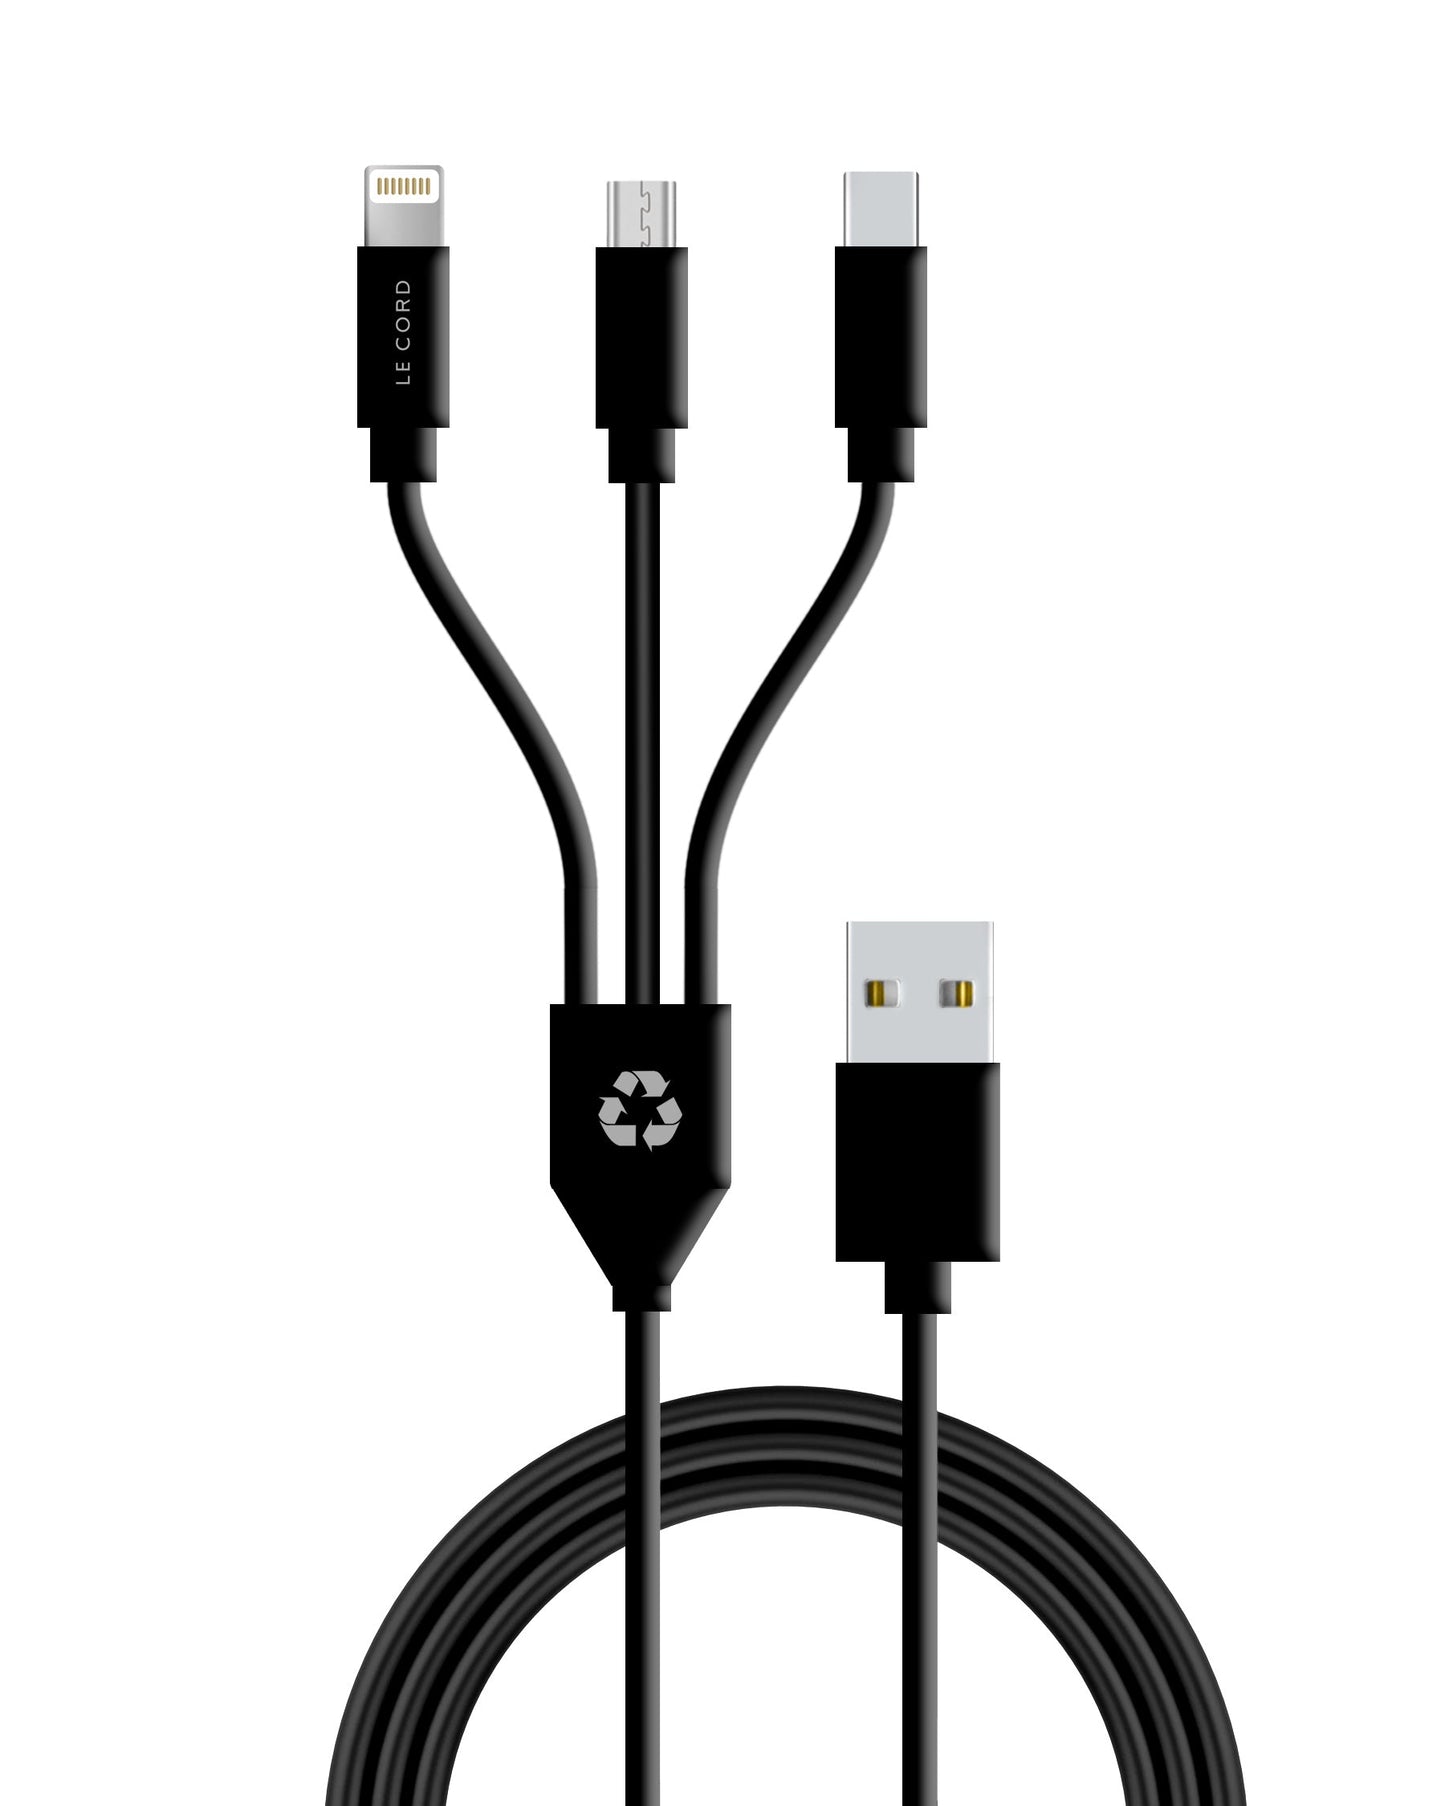 3 in 1 multi cable USB-A - Made of recycled plastics